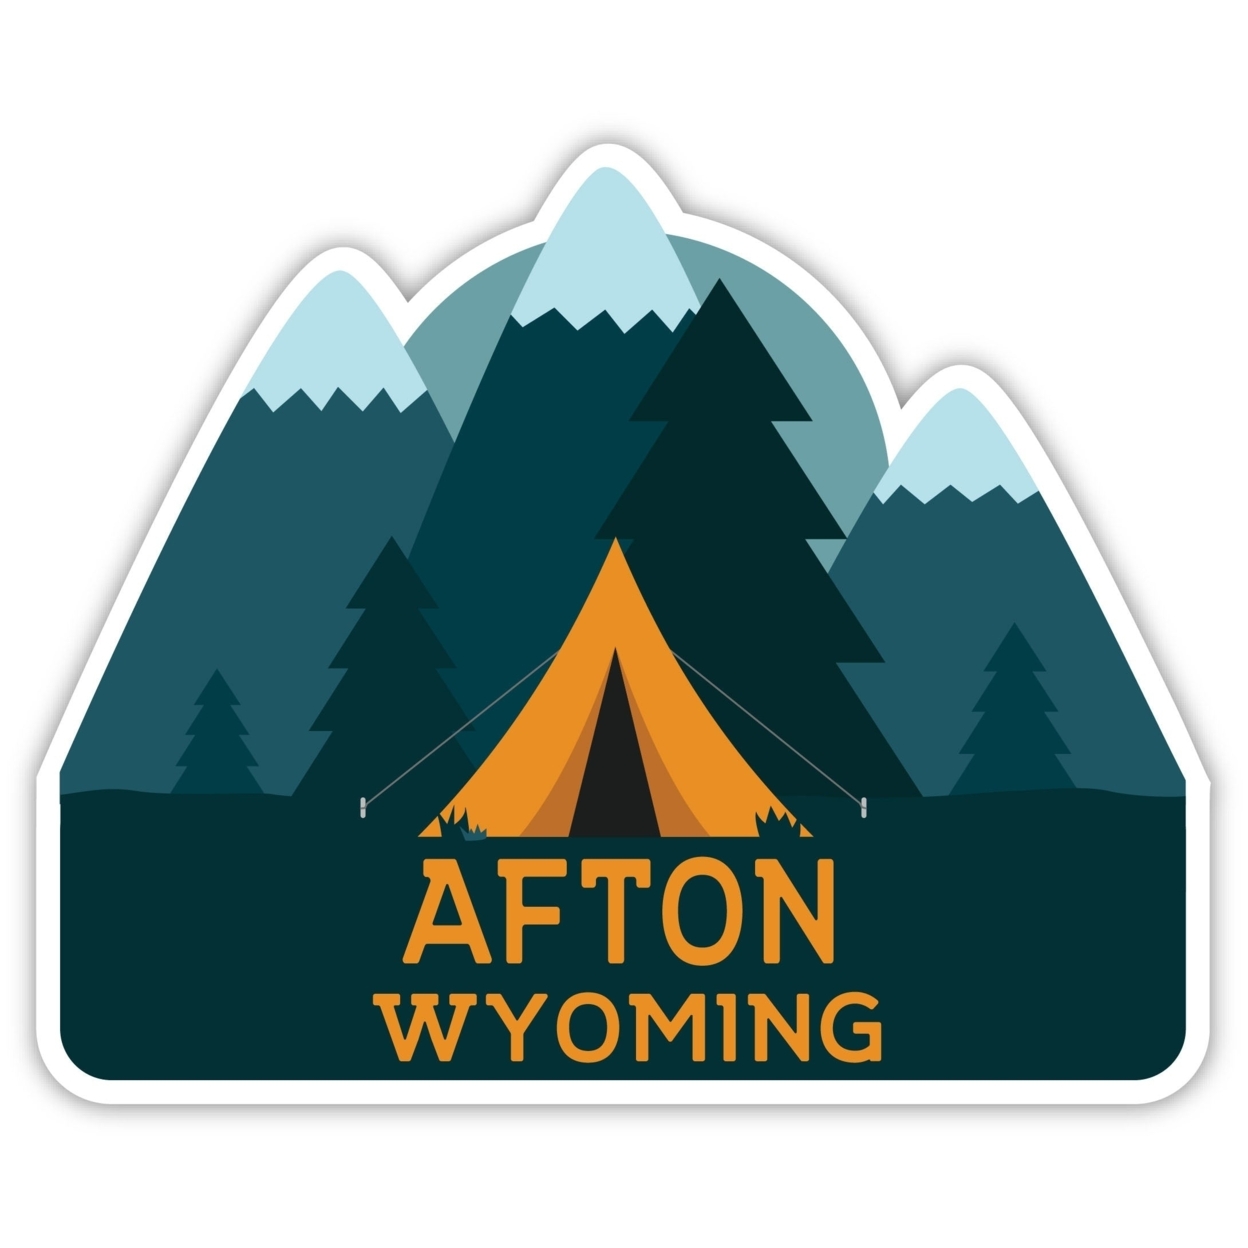 Afton Wyoming Souvenir Decorative Stickers (Choose Theme And Size) - Single Unit, 4-Inch, Tent